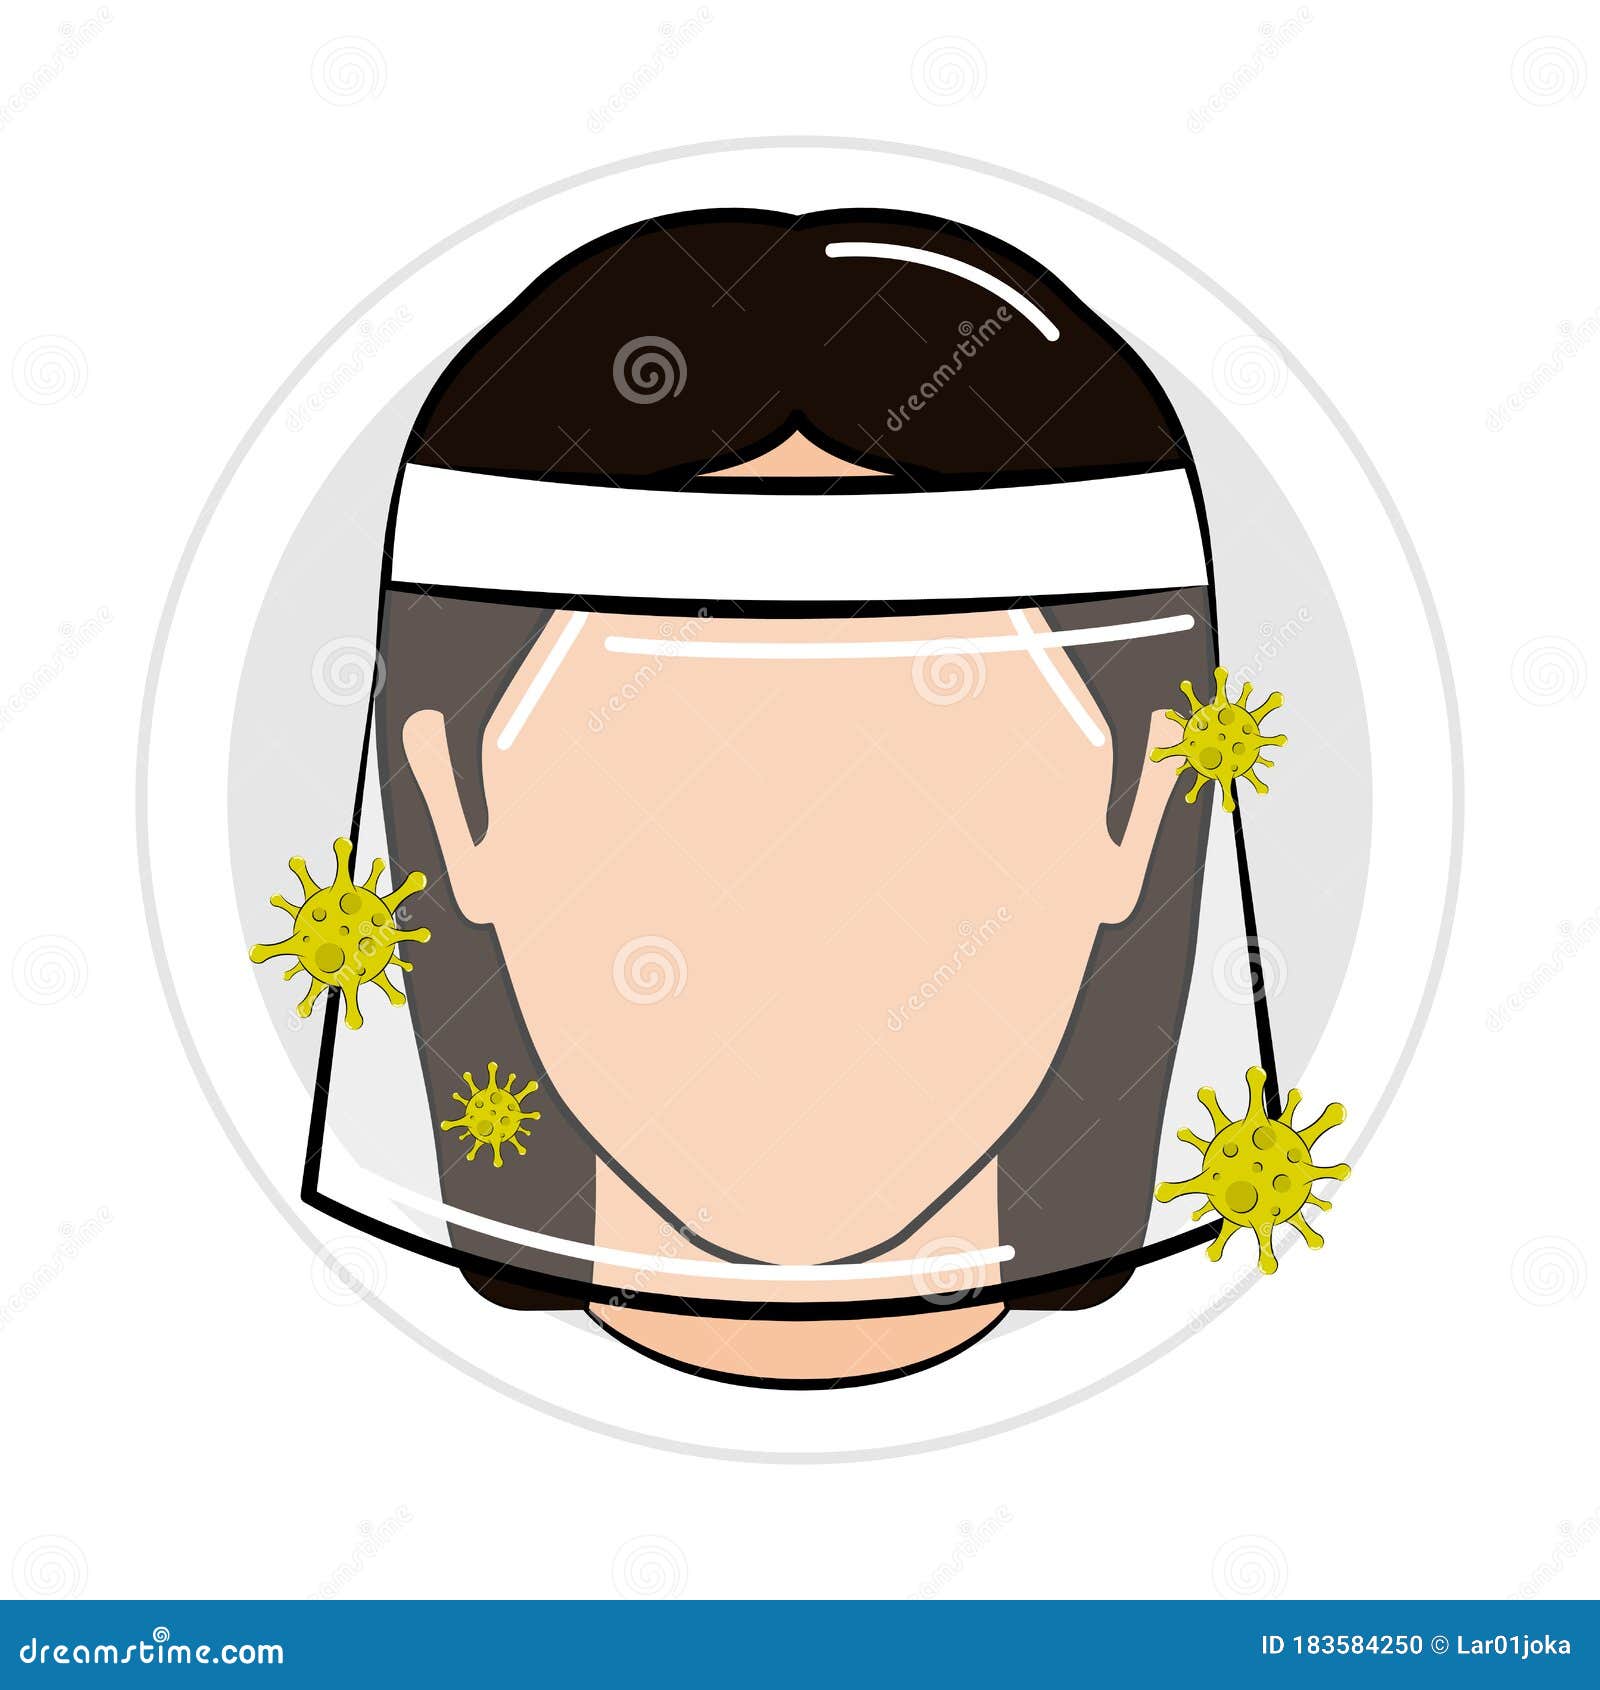 woman with a safety visor